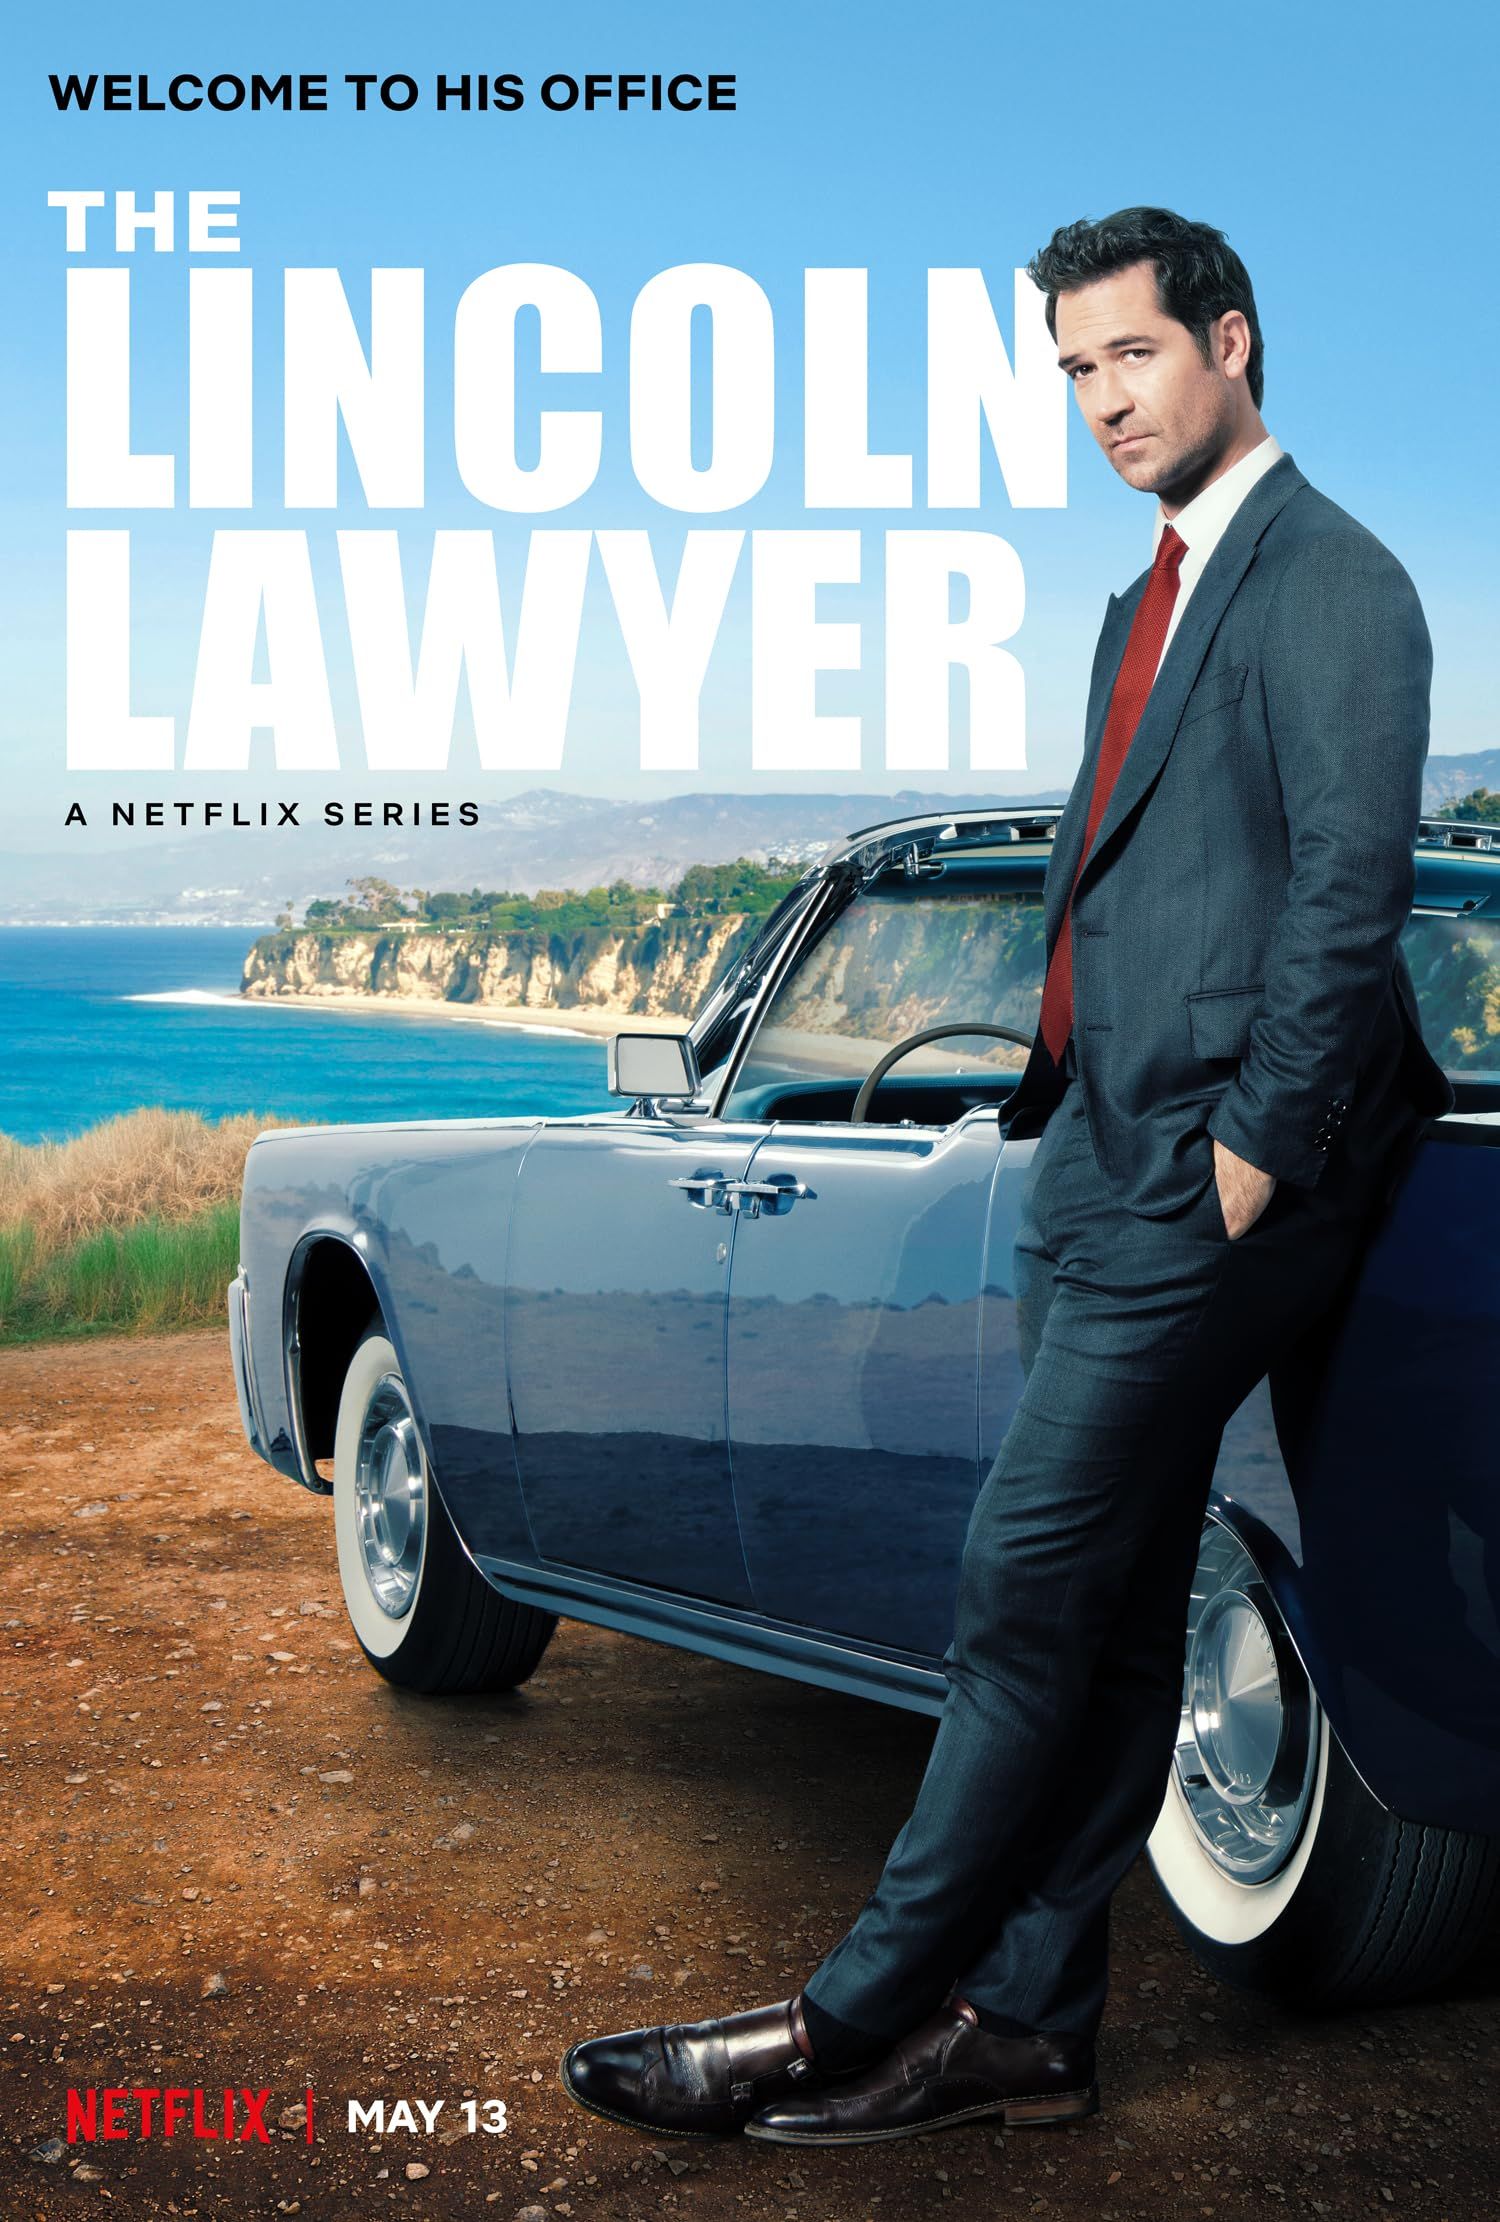 The Lincoln Lawer